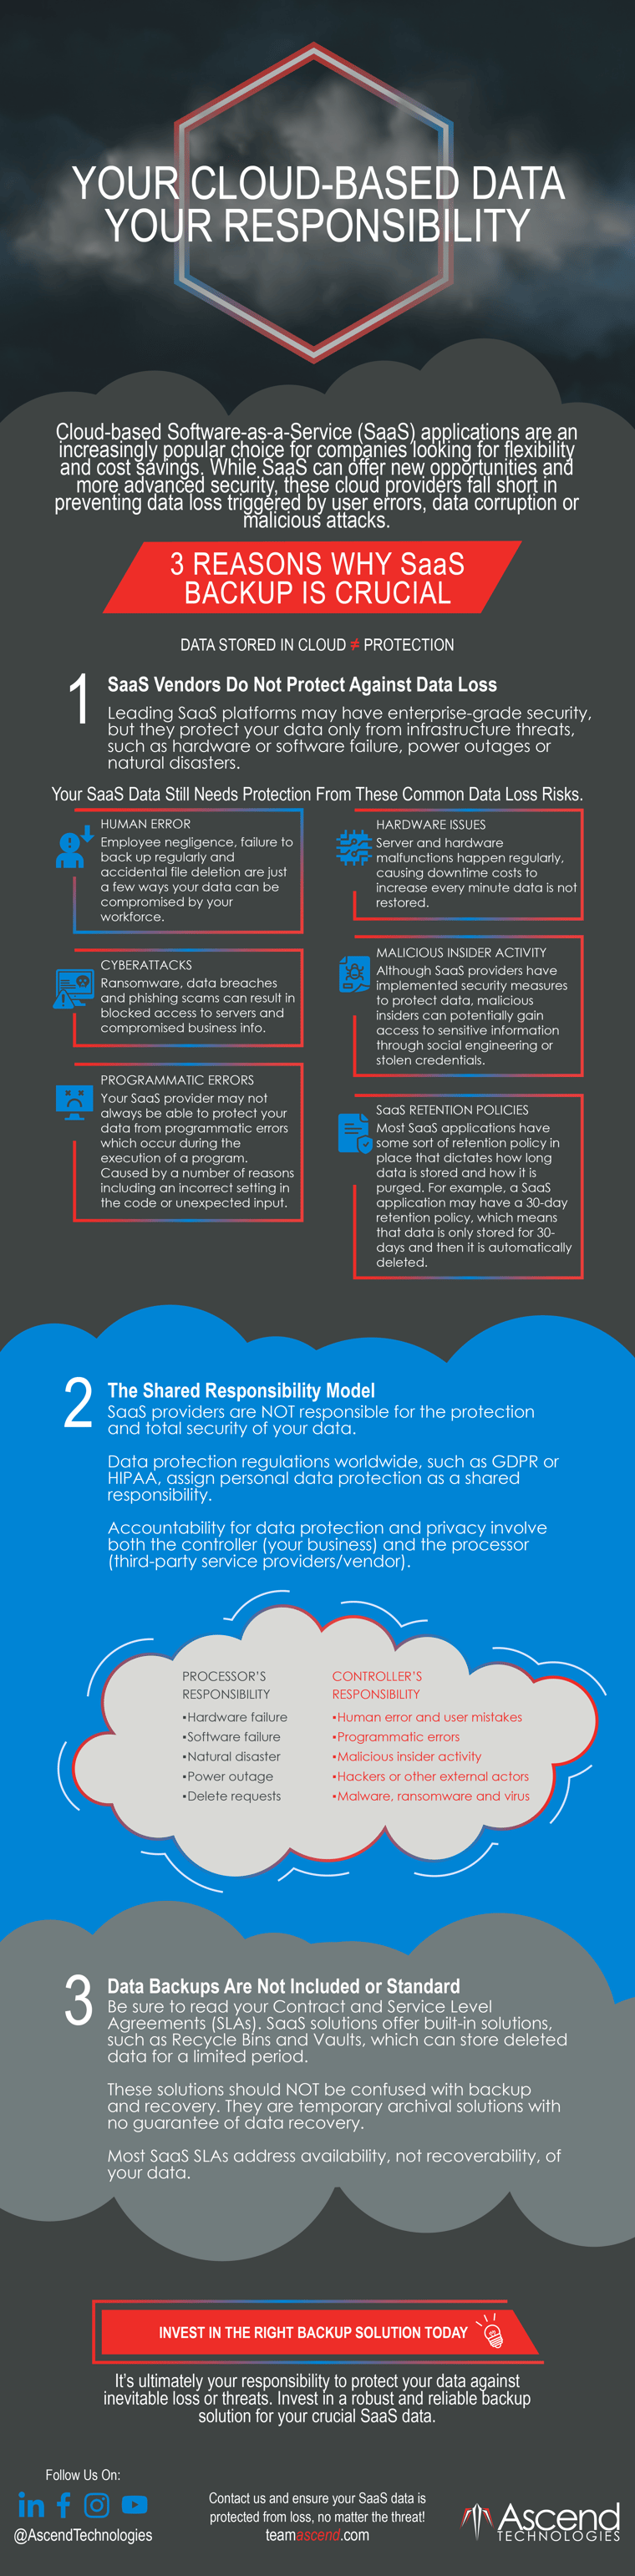 Infographic_Reasons for Cloud Backup_v3